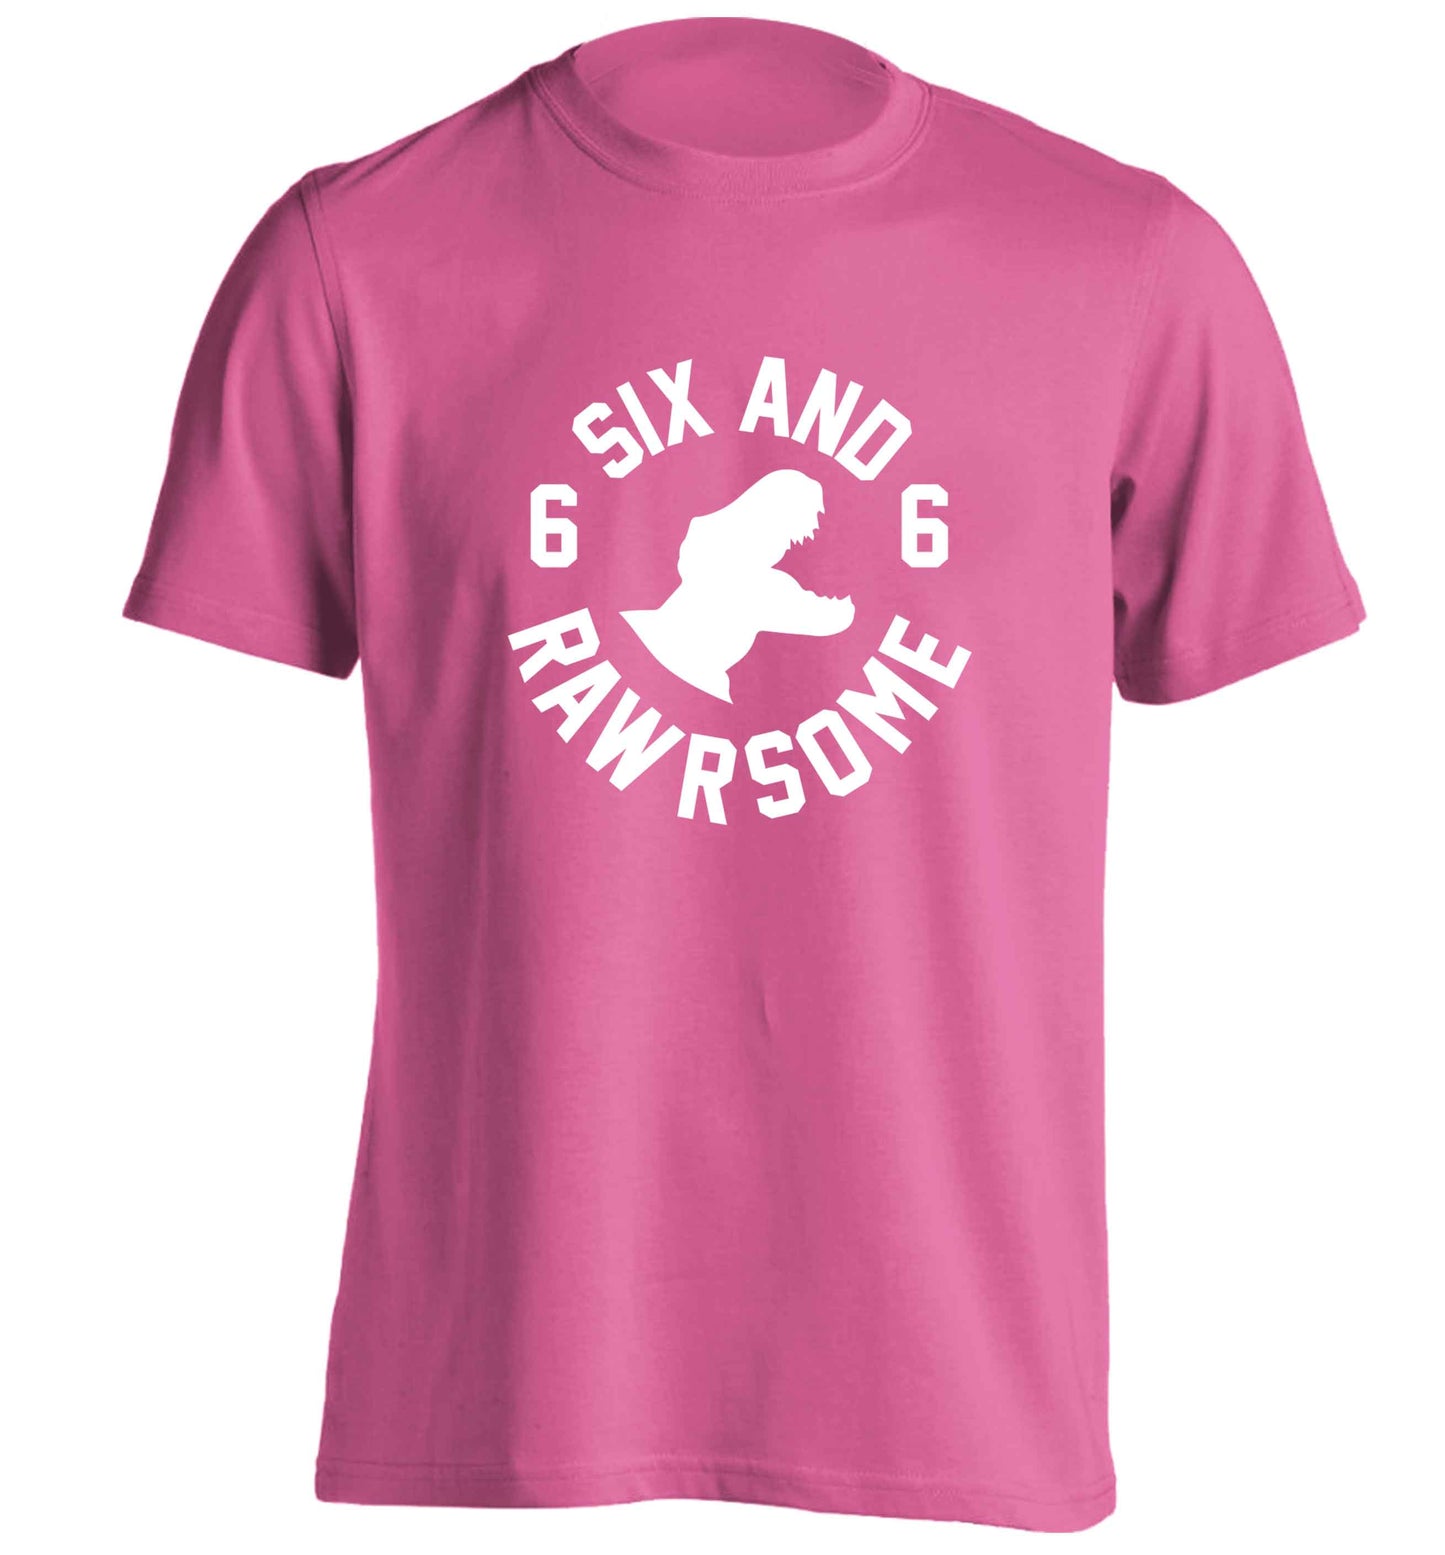 Six and rawrsome adults unisex pink Tshirt 2XL